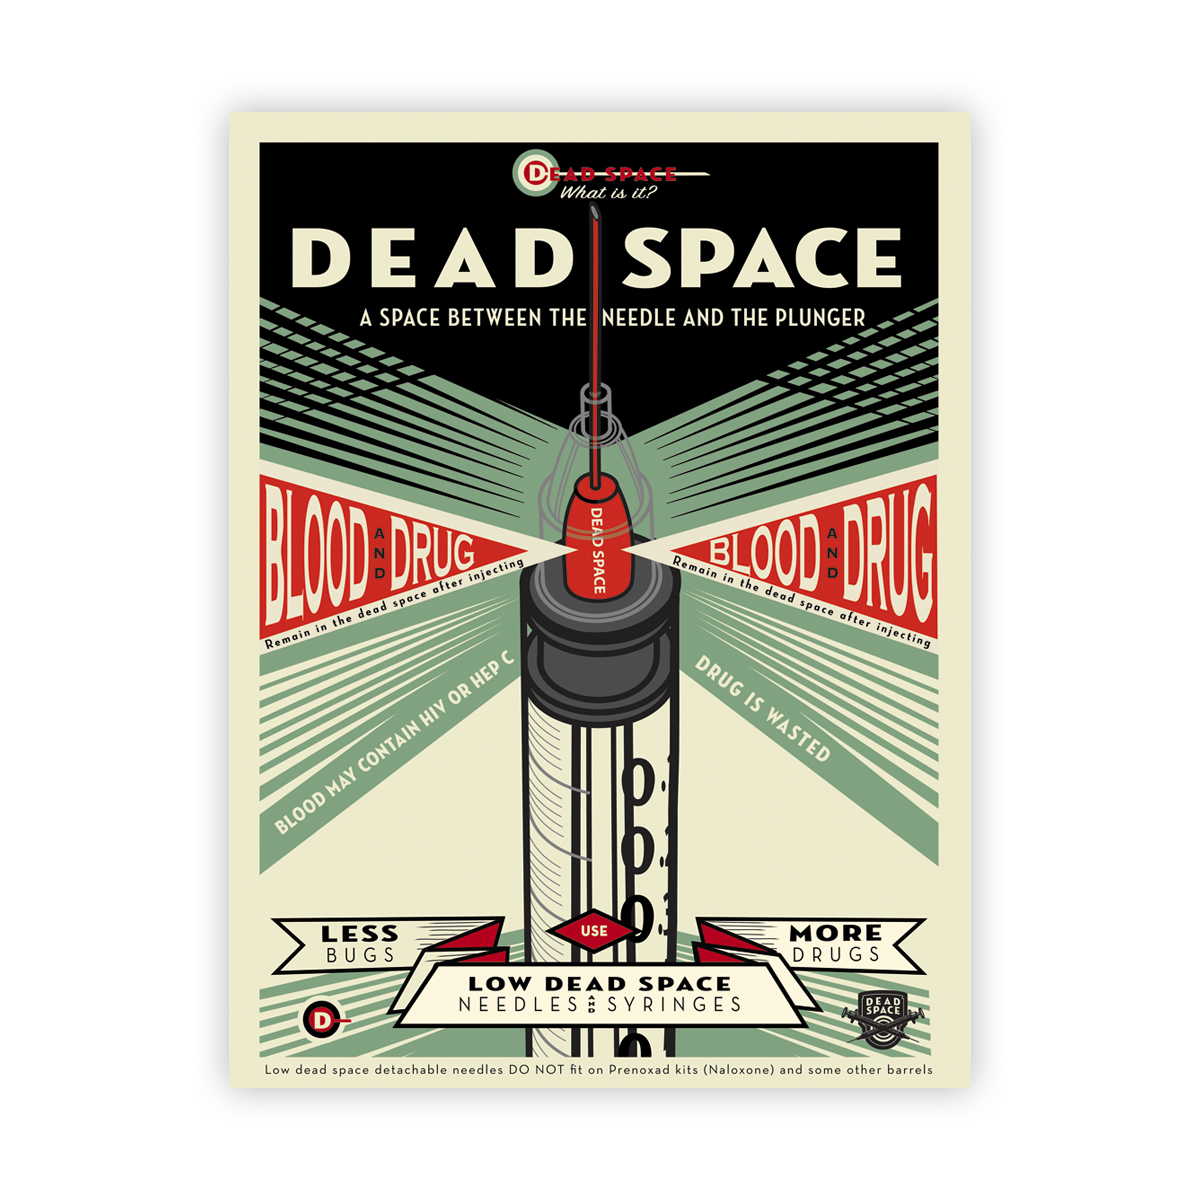 Dead space - what is it? poster